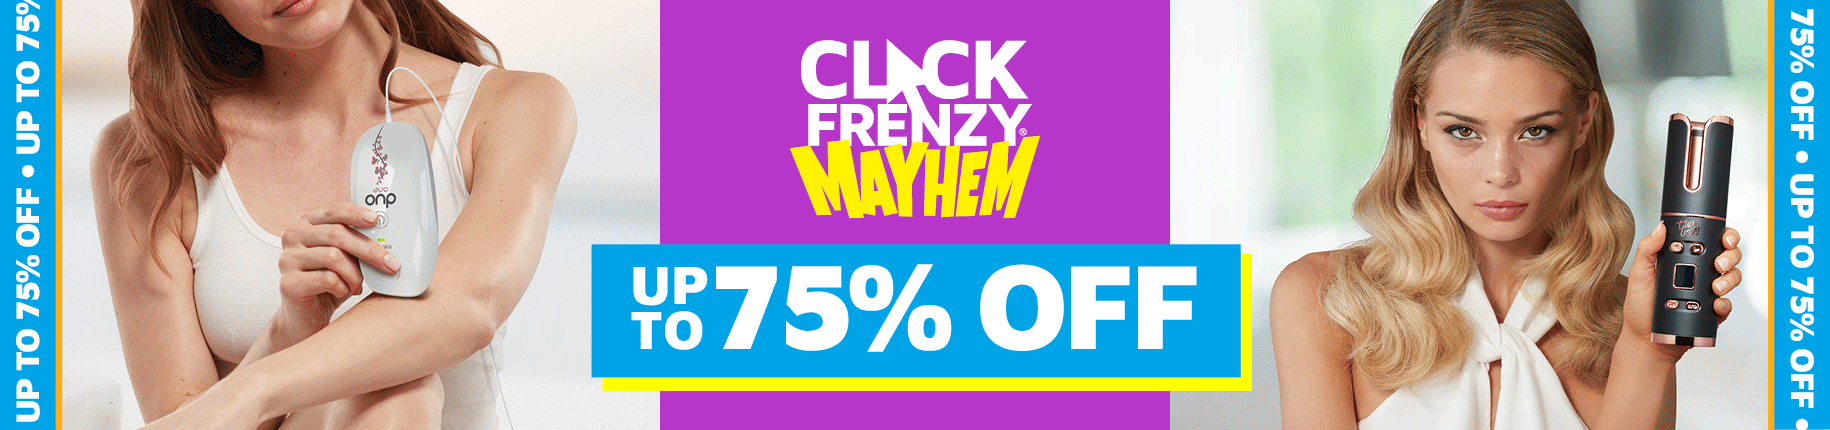 Click Frenzy sale - Save up to 75% OFF on beauty, oral care, hair styling & more